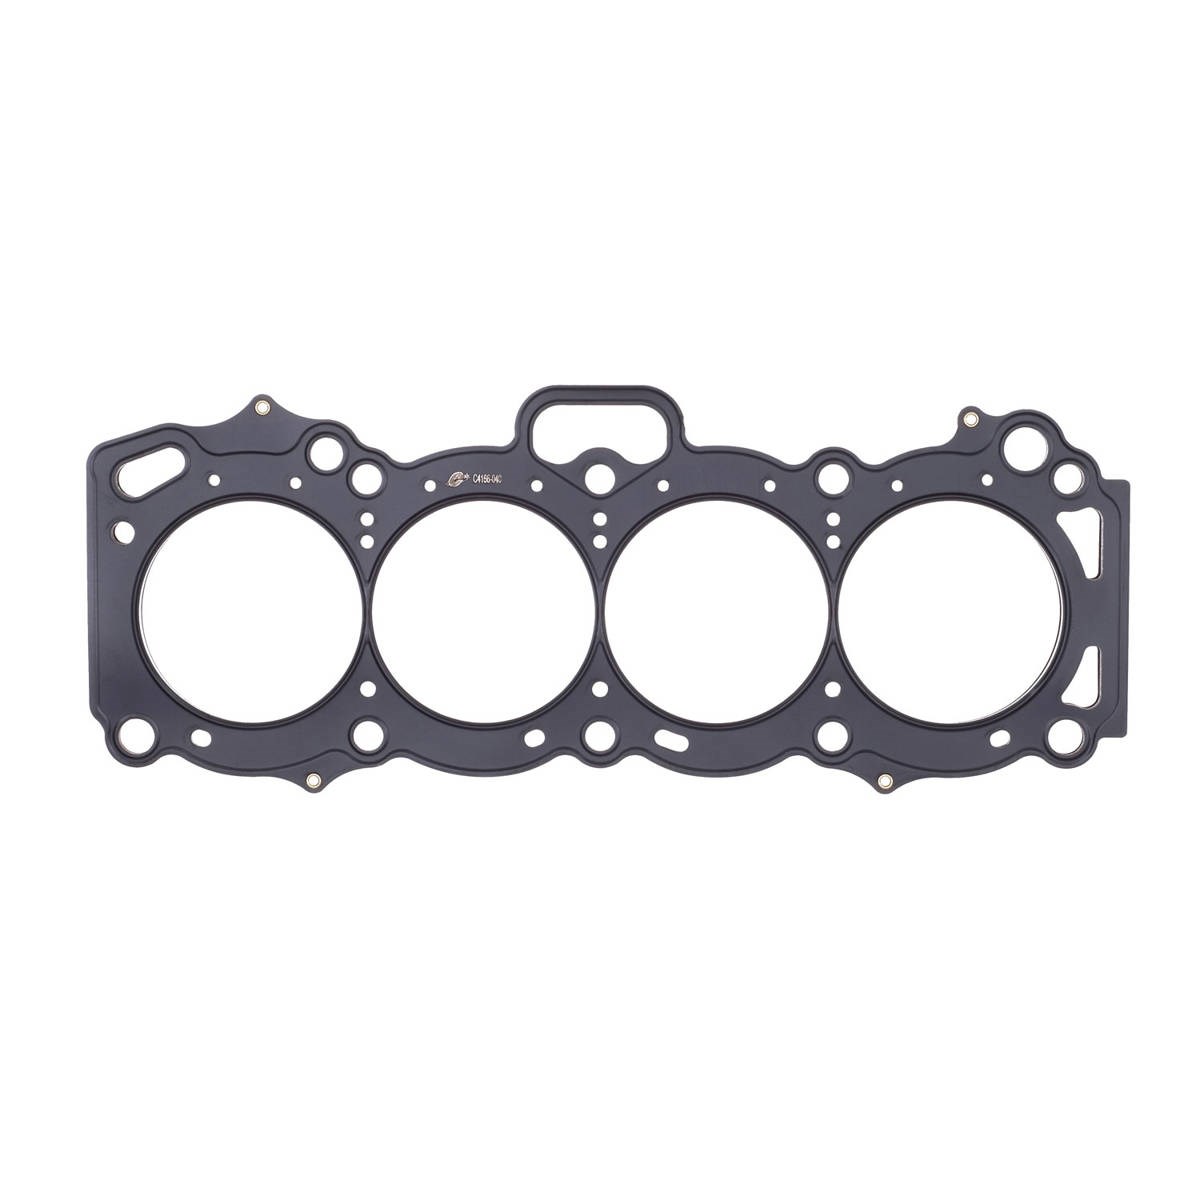 Cylinder Head Gasket Toyota 4A-GE/4A-GEZ .051" MLS , 83mm Bore, 16-Valve Cometic C4166-051